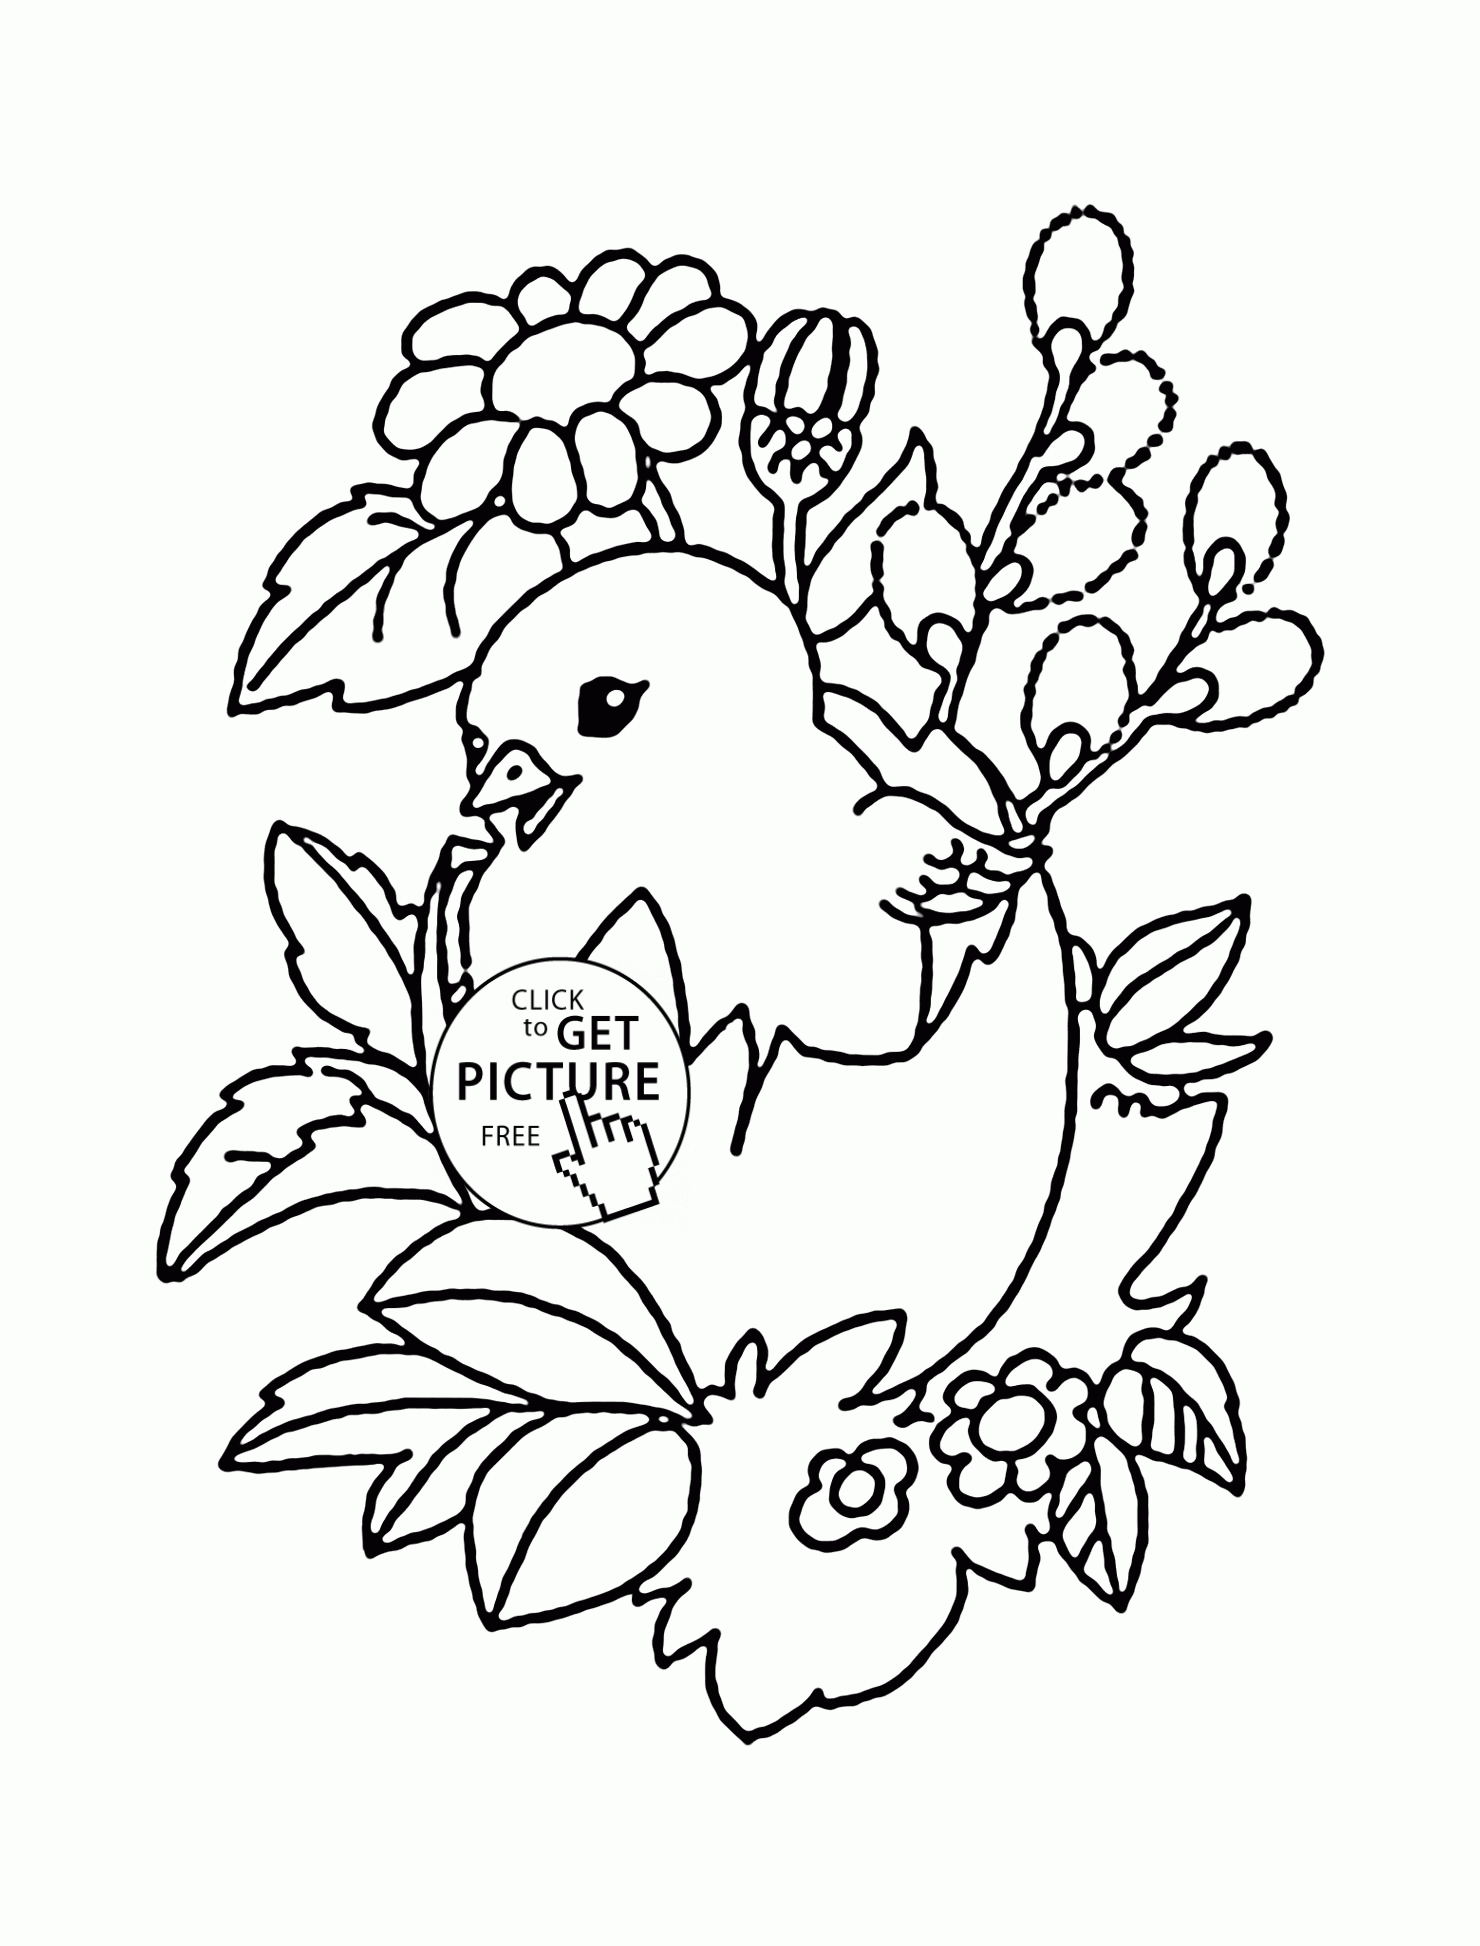 Easter Chick Coloring Page For Kids, Holidays Coloring Pages - Free Printable Easter Baby Chick Coloring Pages